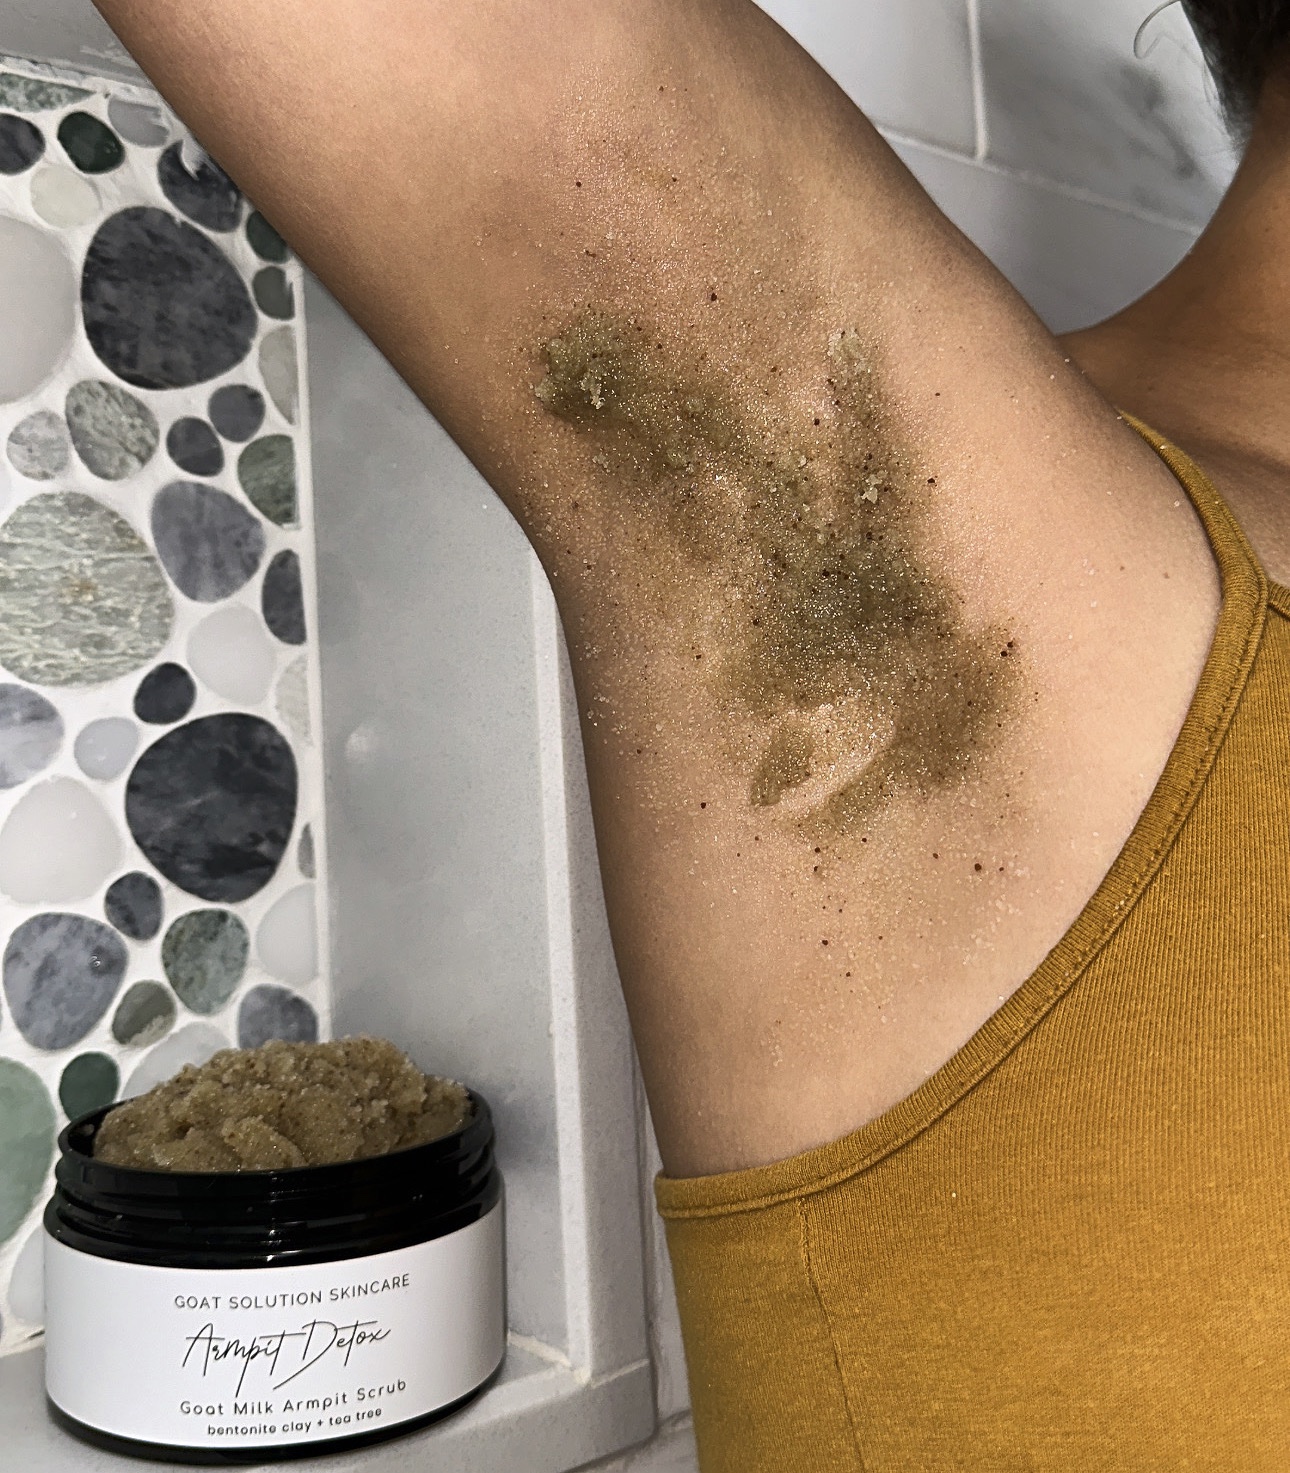 Elevate Your Fitness and Self-Care Routine with Goat Solution Skincare’s Pit Grit This Summer